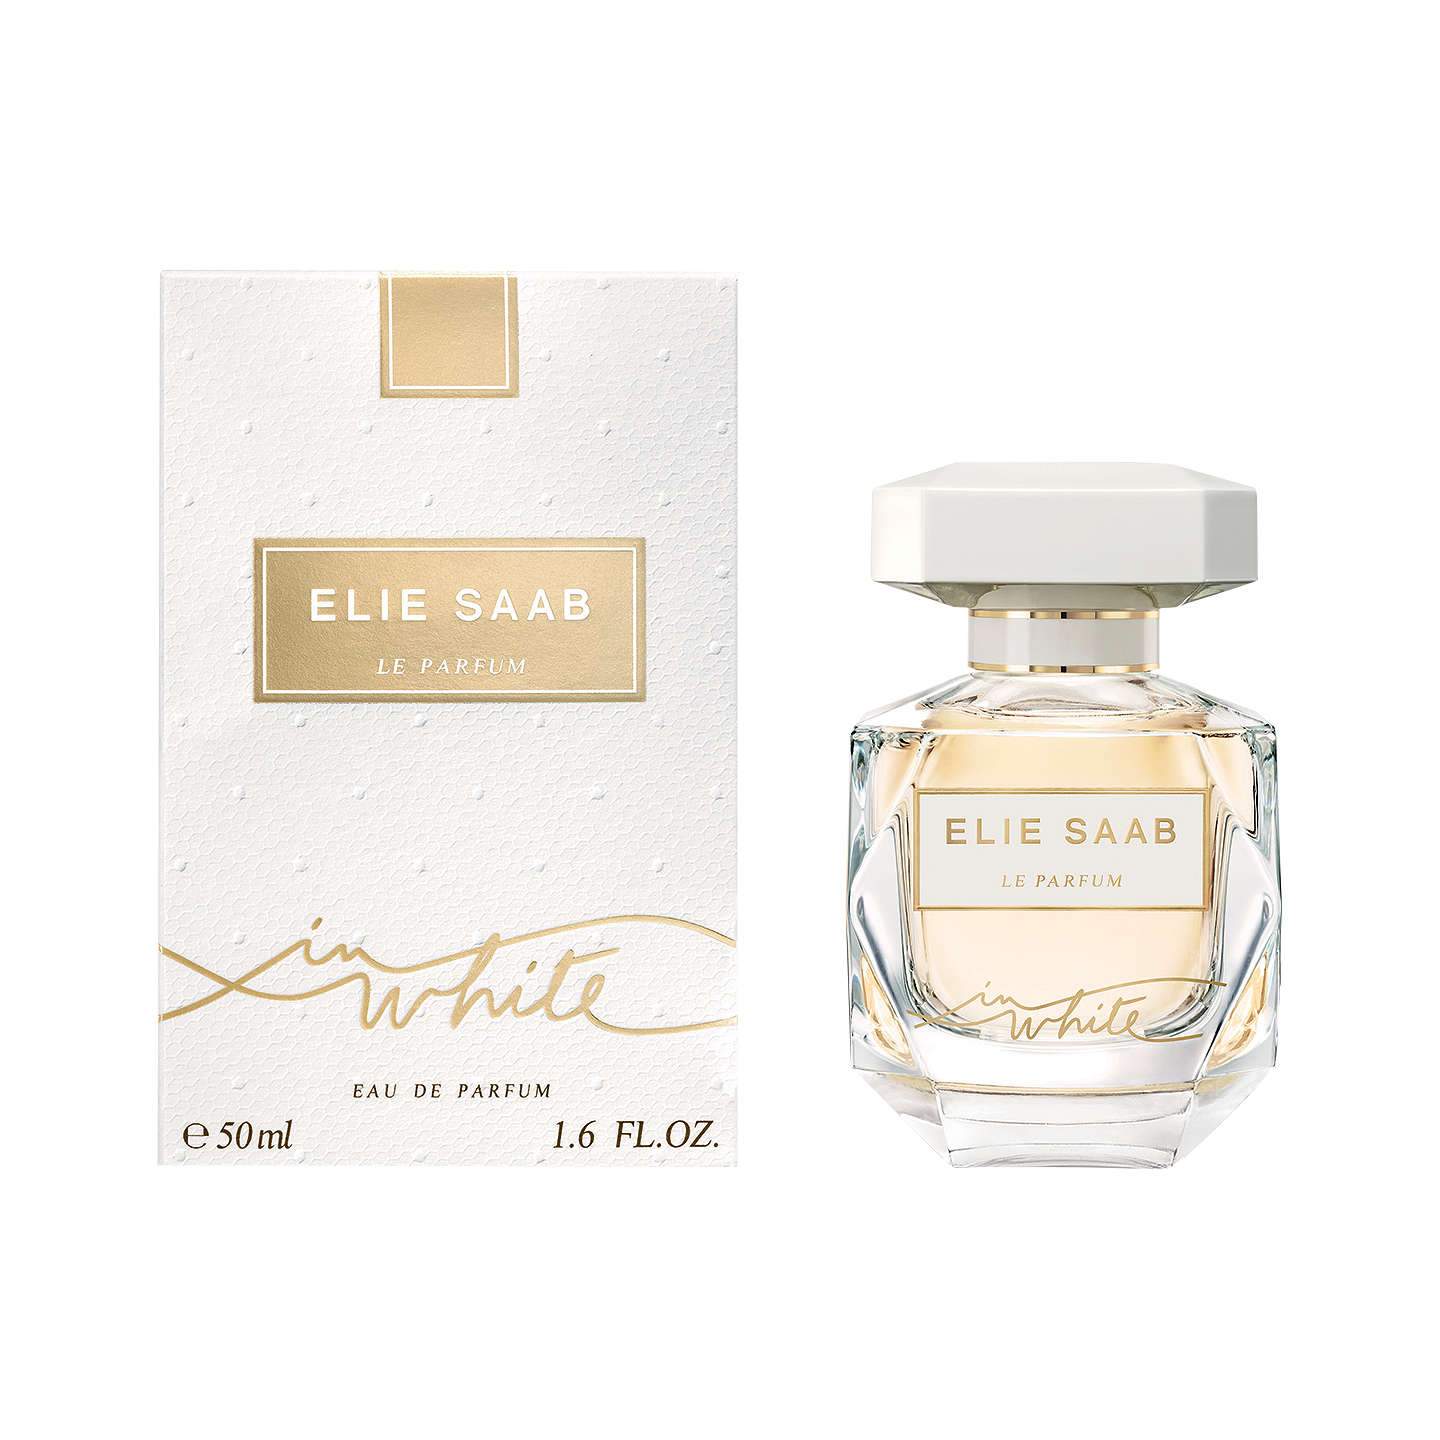 <p>Like an Haute Couture dress cut in a precious fabric, the Eau de Parfum celebrates the splendour and radiance of a glowing femininity.The bottle, a true jewel of glass and light, infinitely reflects the honeyed-gold nuances of the perfume.</p>